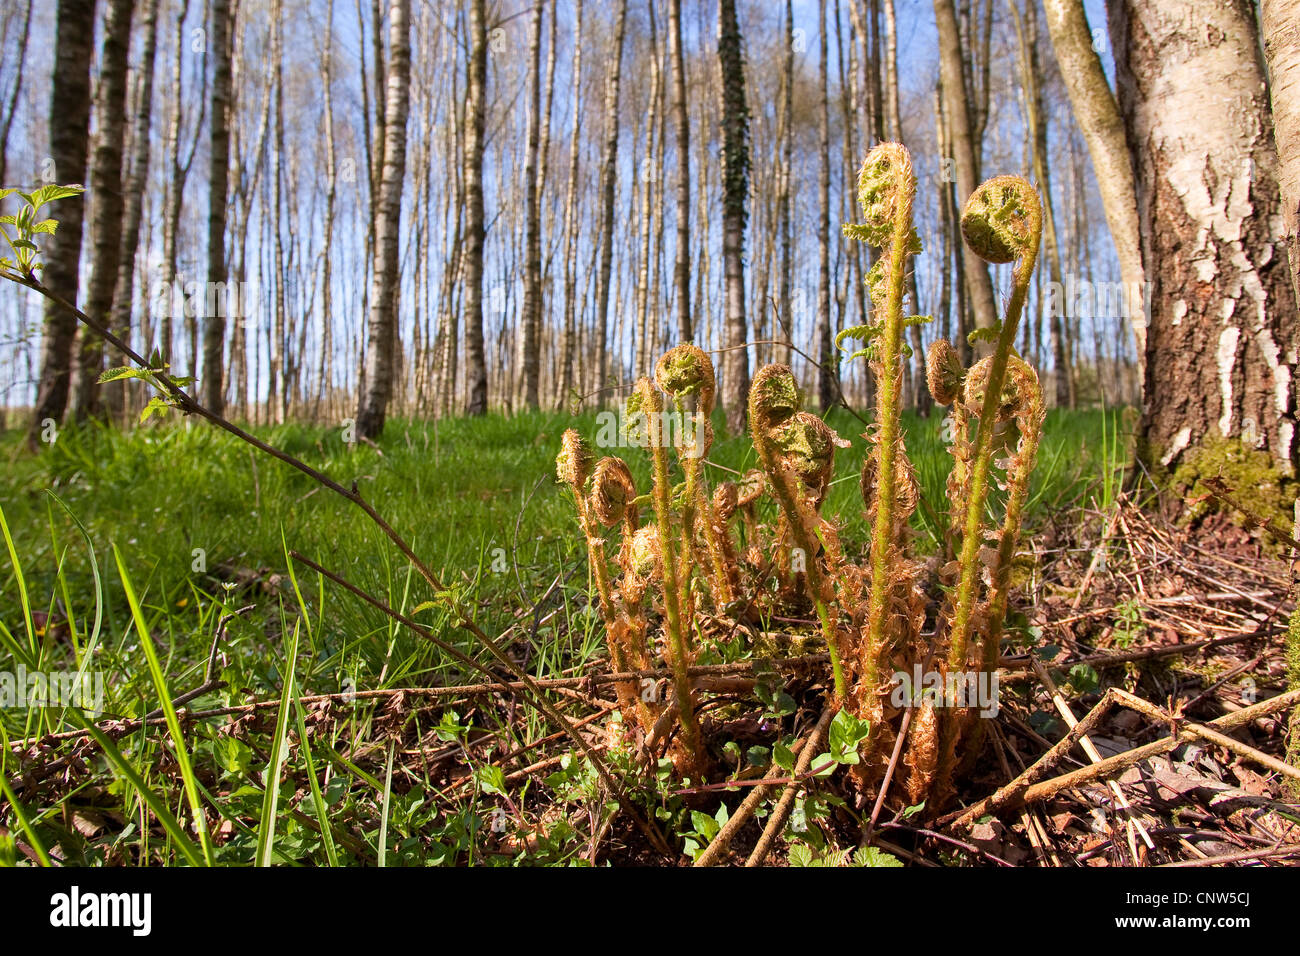 male-fern (Dryopteris filix-mas), young fronds in a forest in spring, Germany Stock Photo